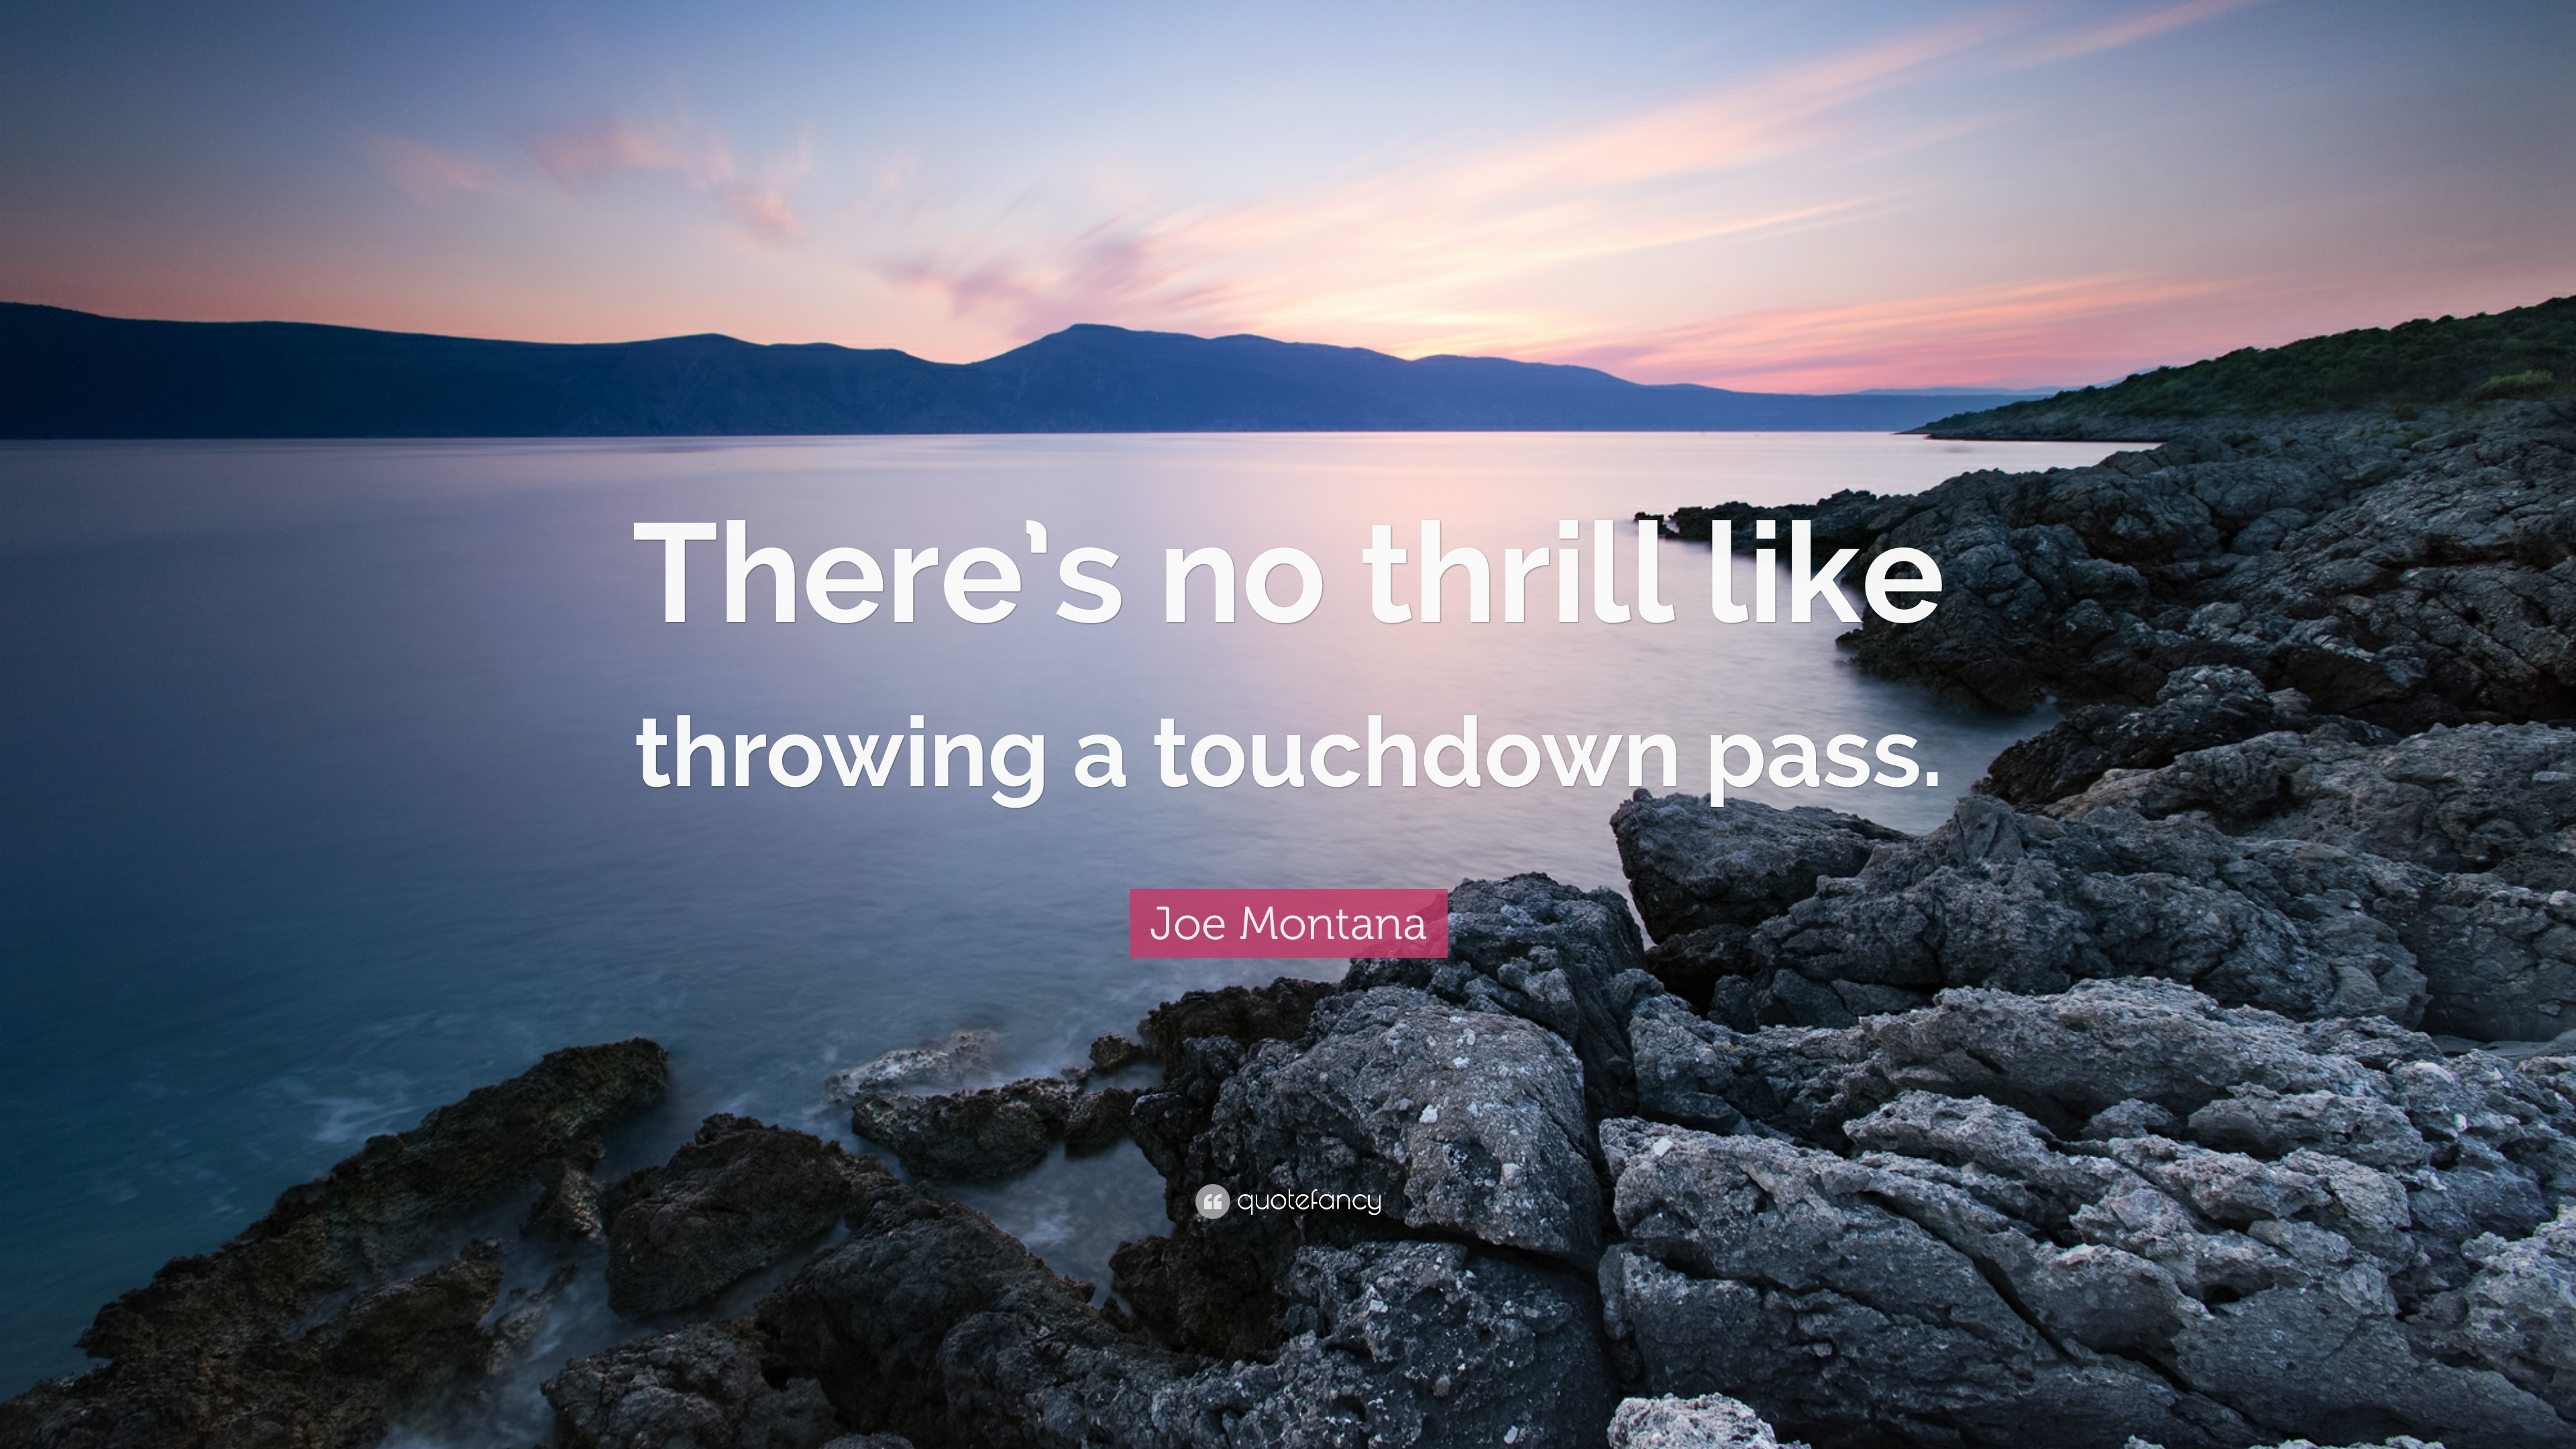 3840x2160 Joe Montana Quote: “There's no thrill like throwing a touchdown pass.”